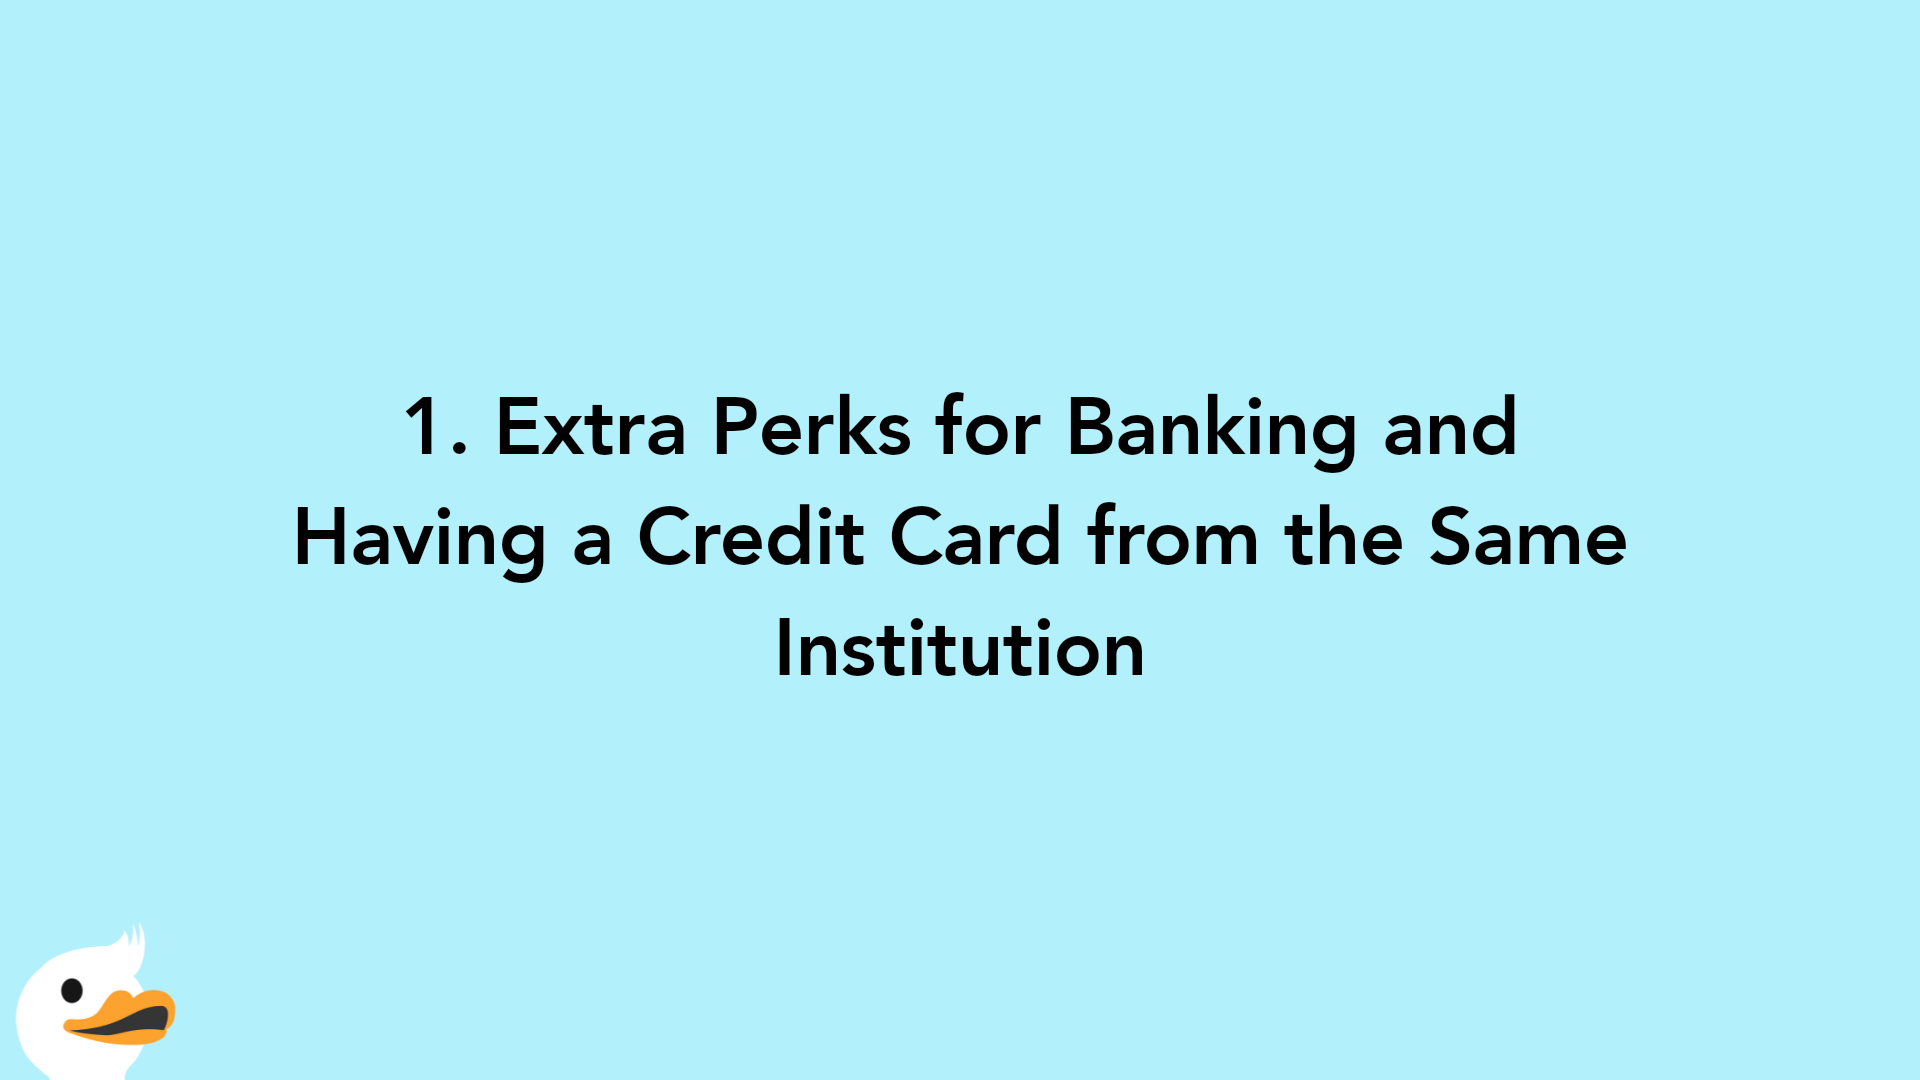 1. Extra Perks for Banking and Having a Credit Card from the Same Institution